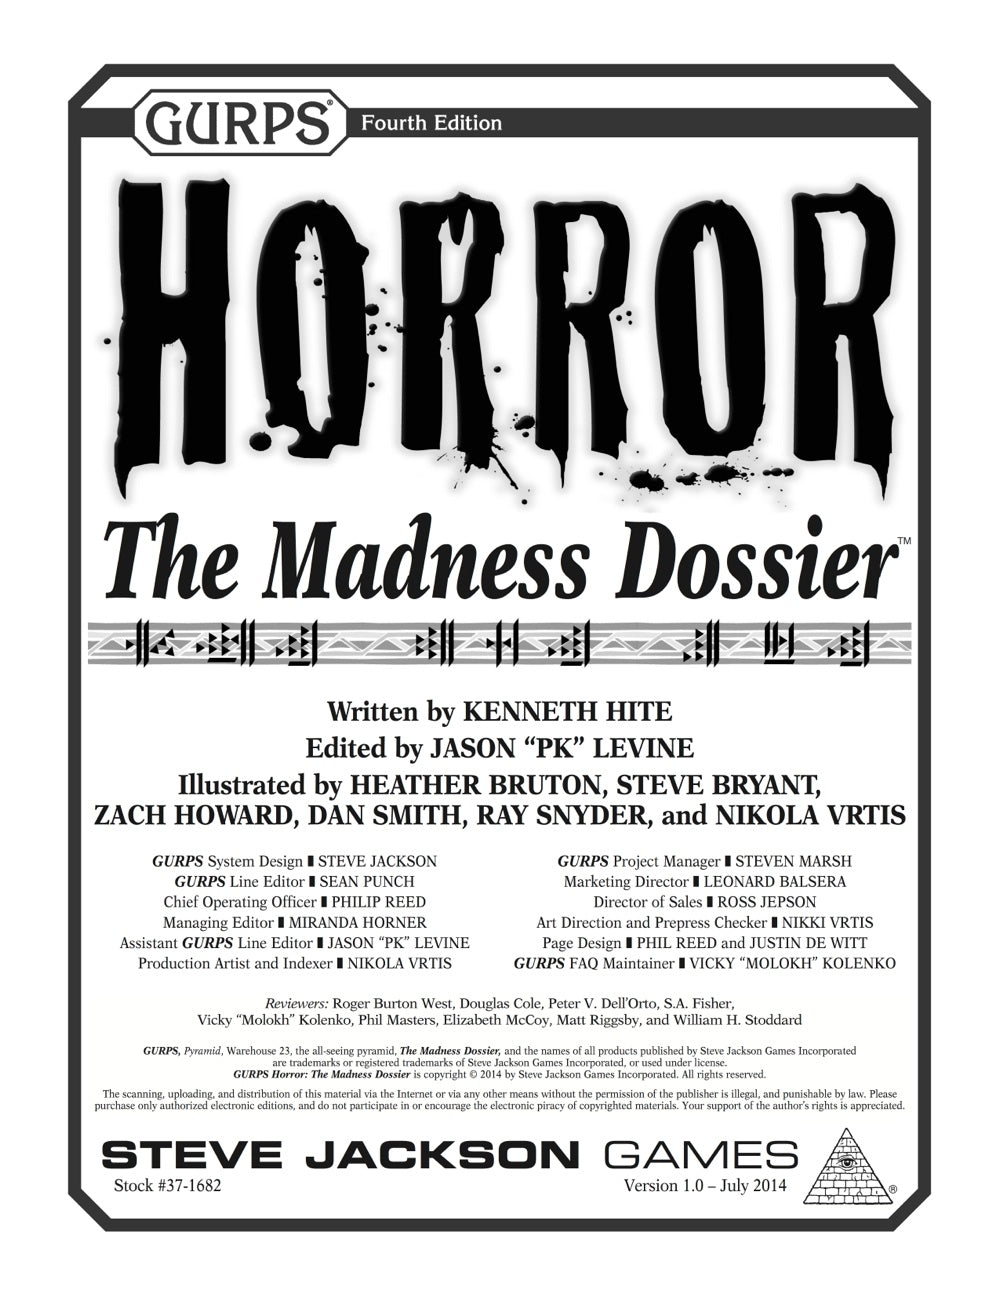 GURPS Horror: The Madness Dossier